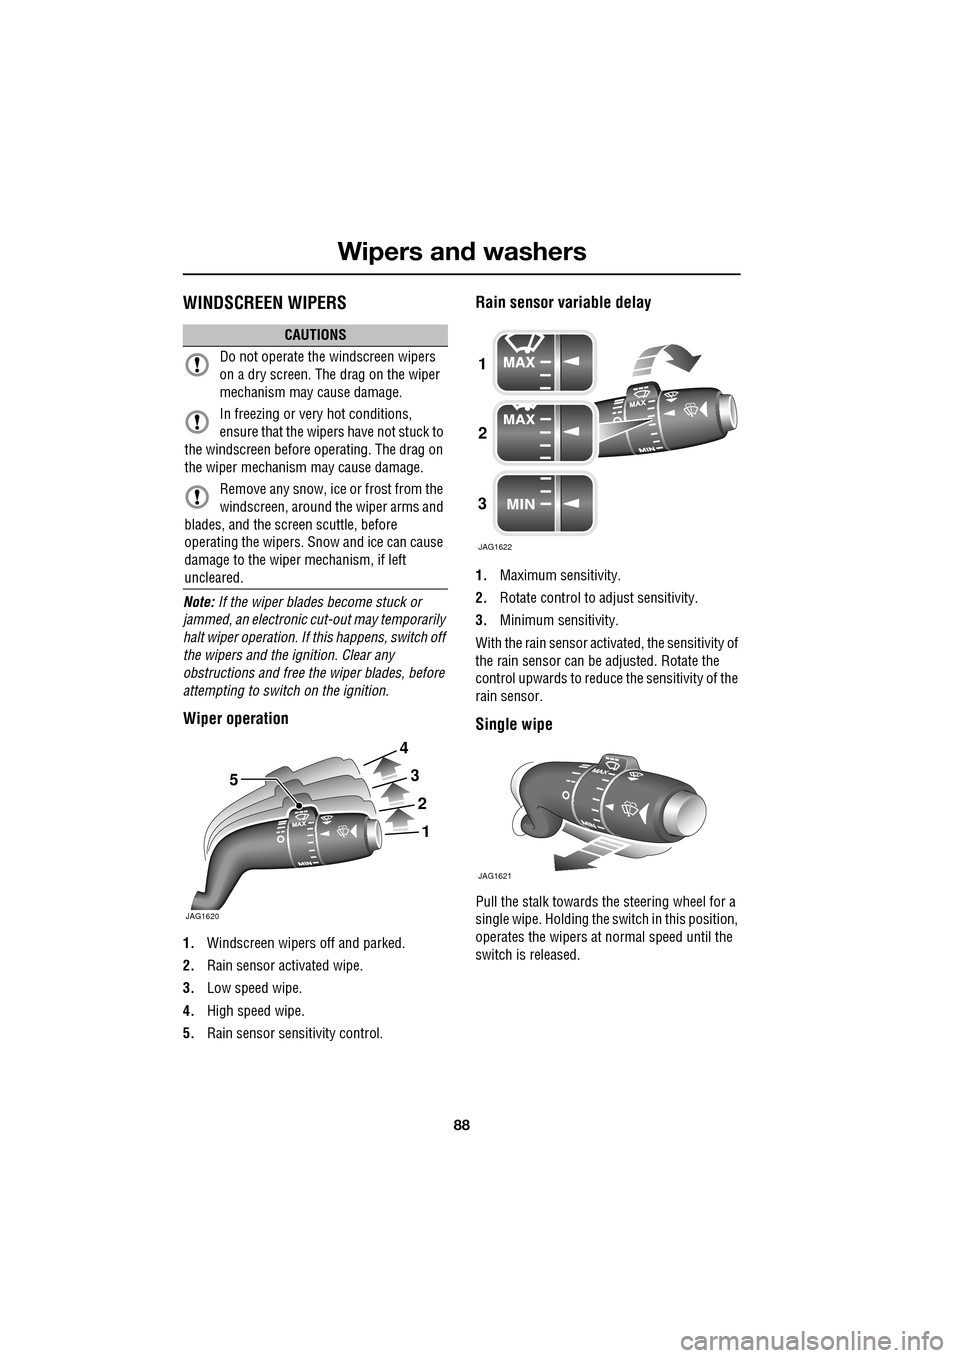 JAGUAR XF 2009 1.G Owners Manual Wipers and washers
88
               
   WINDSCREEN WIPERS
Note: If the wiper blades become stuck or 
jammed, an electronic cut-out may temporarily 
halt wiper operation. If this happens, switch off 
